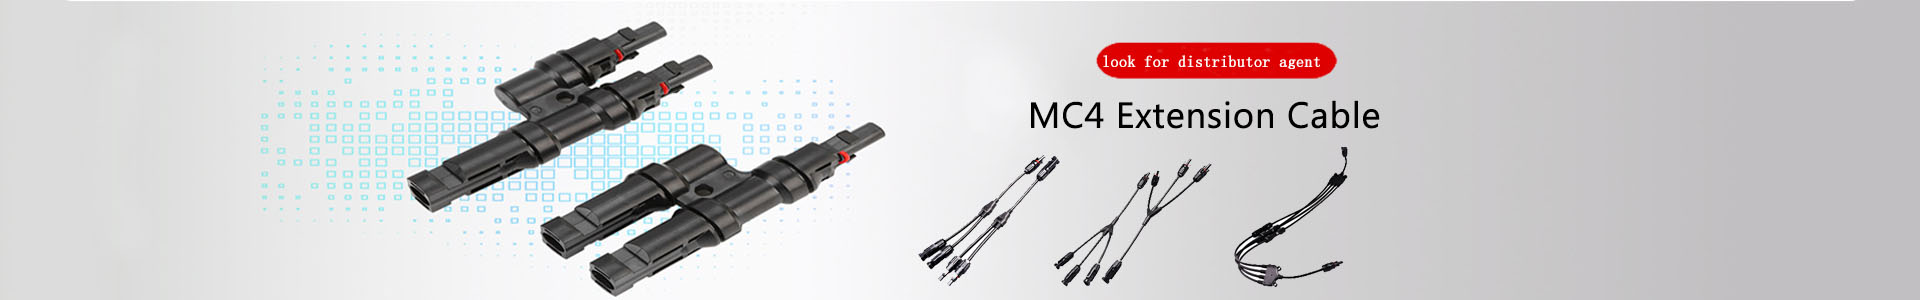 Roof Distributed Solar Project-Solar | solar connector,solar branch connector,diode fuse connector,MC4 extnsion cable,H1Z2Z2 solar cable, UL4703 solar cable | Leading manufacturer and supplier of solar pv cables and connectors